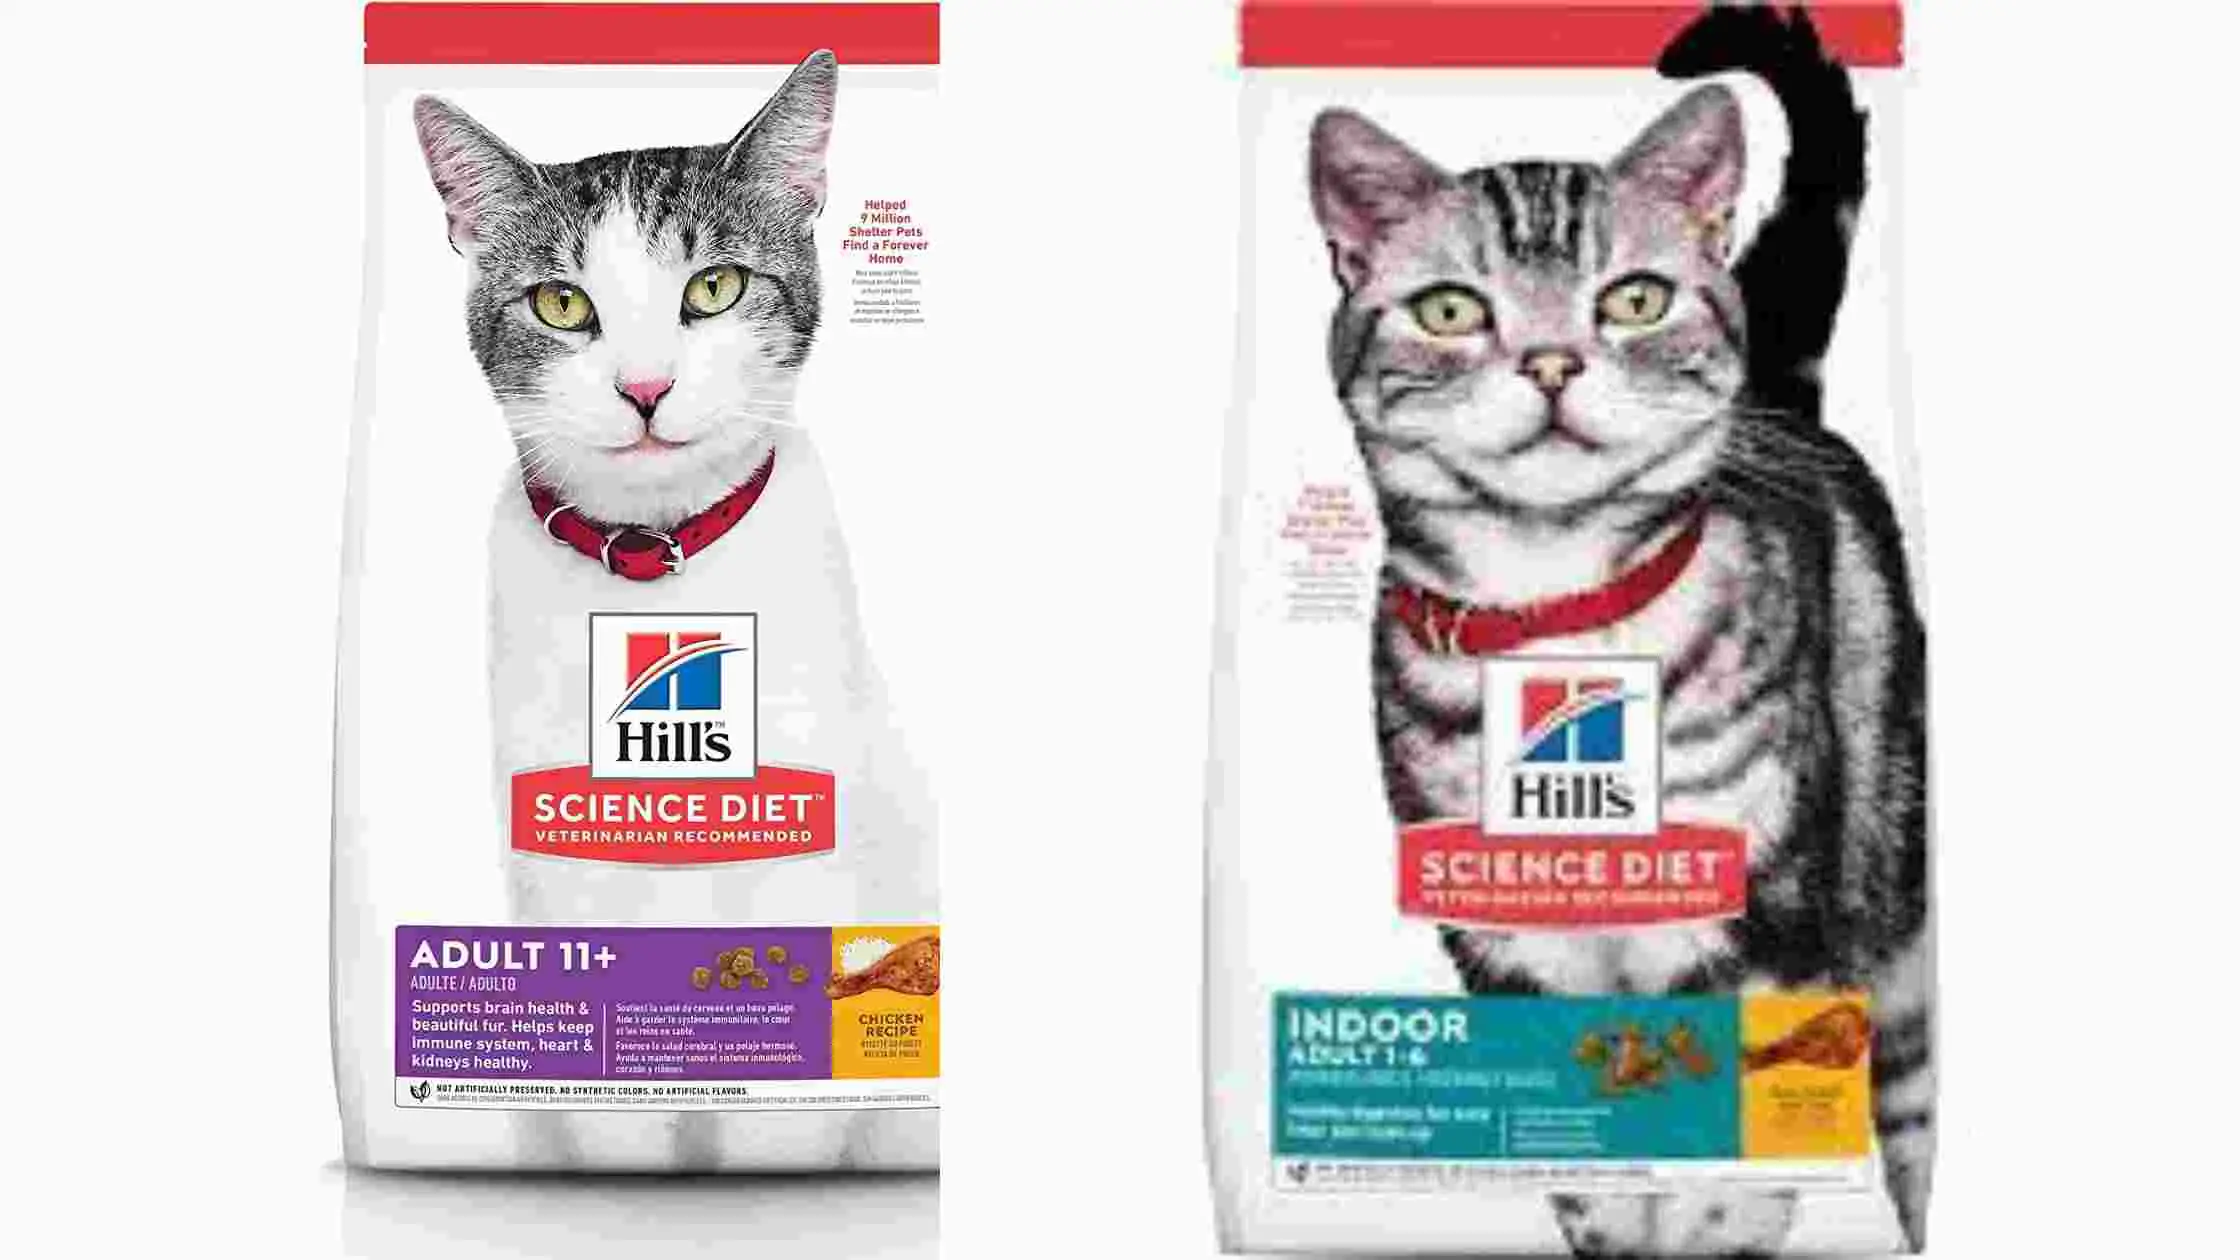 Is Hill's science diet good for cats